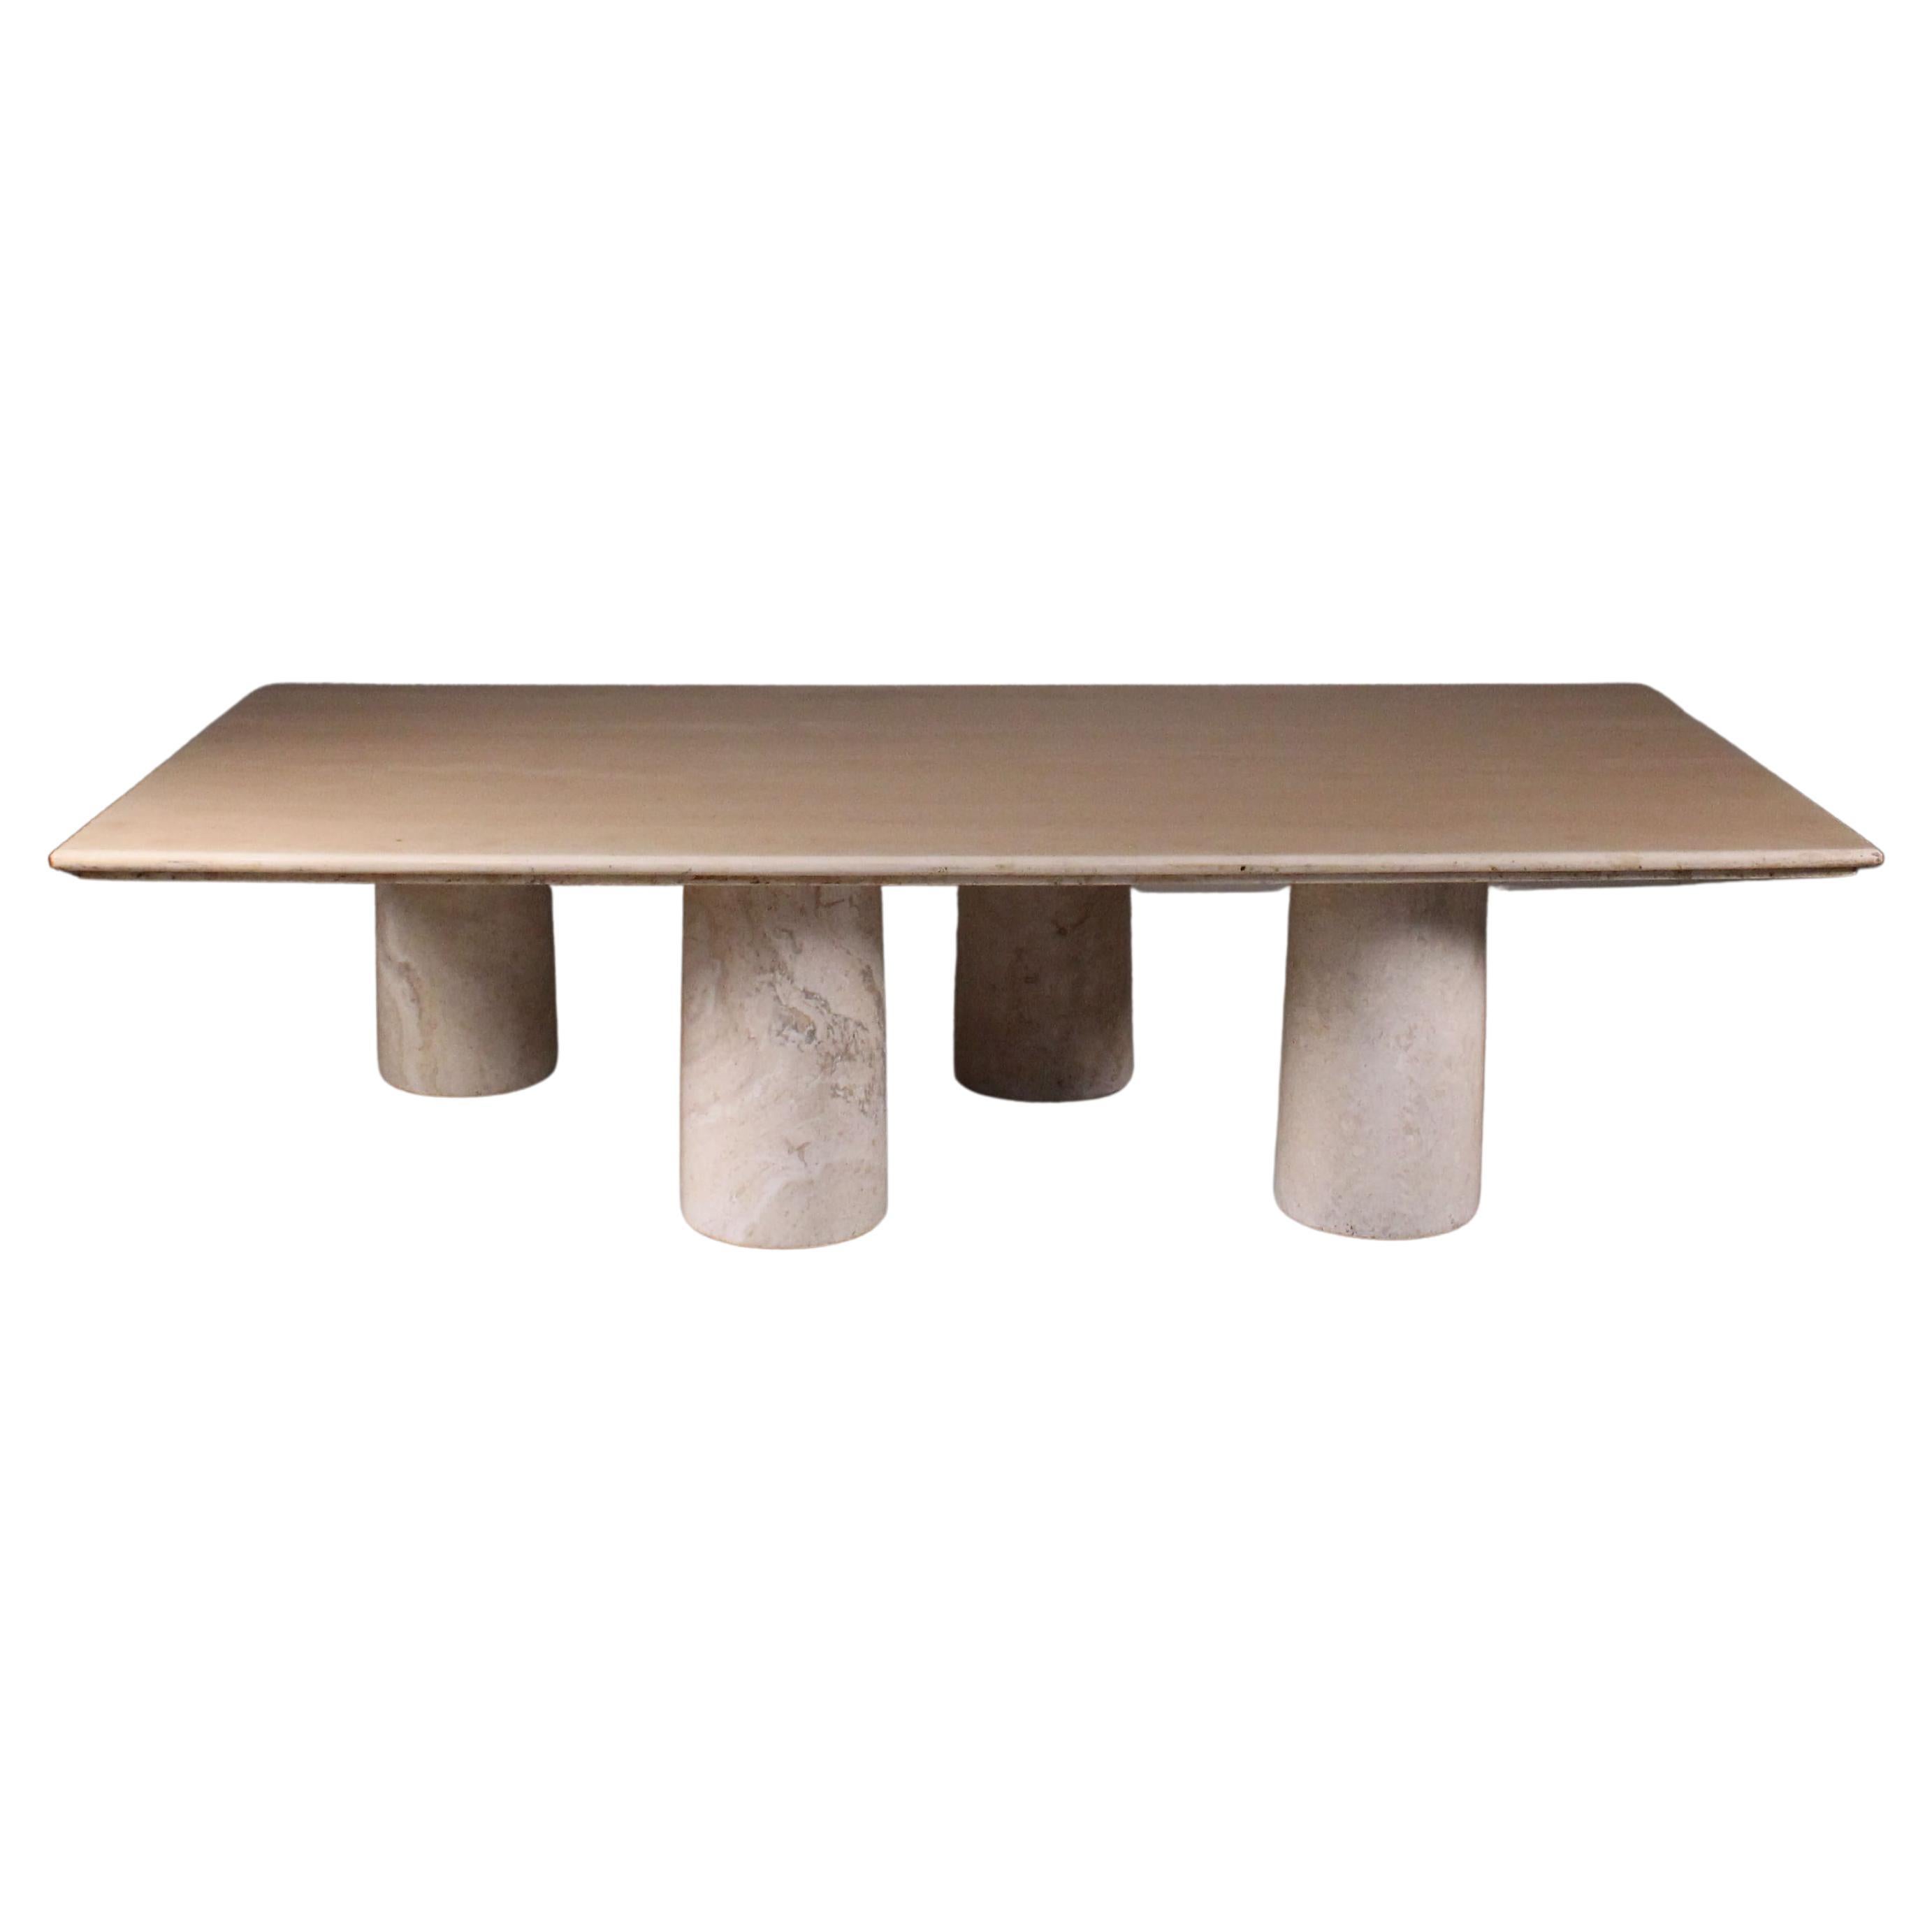  Colonnaded marble coffee table, Mario Bellini, Cassina, 1969